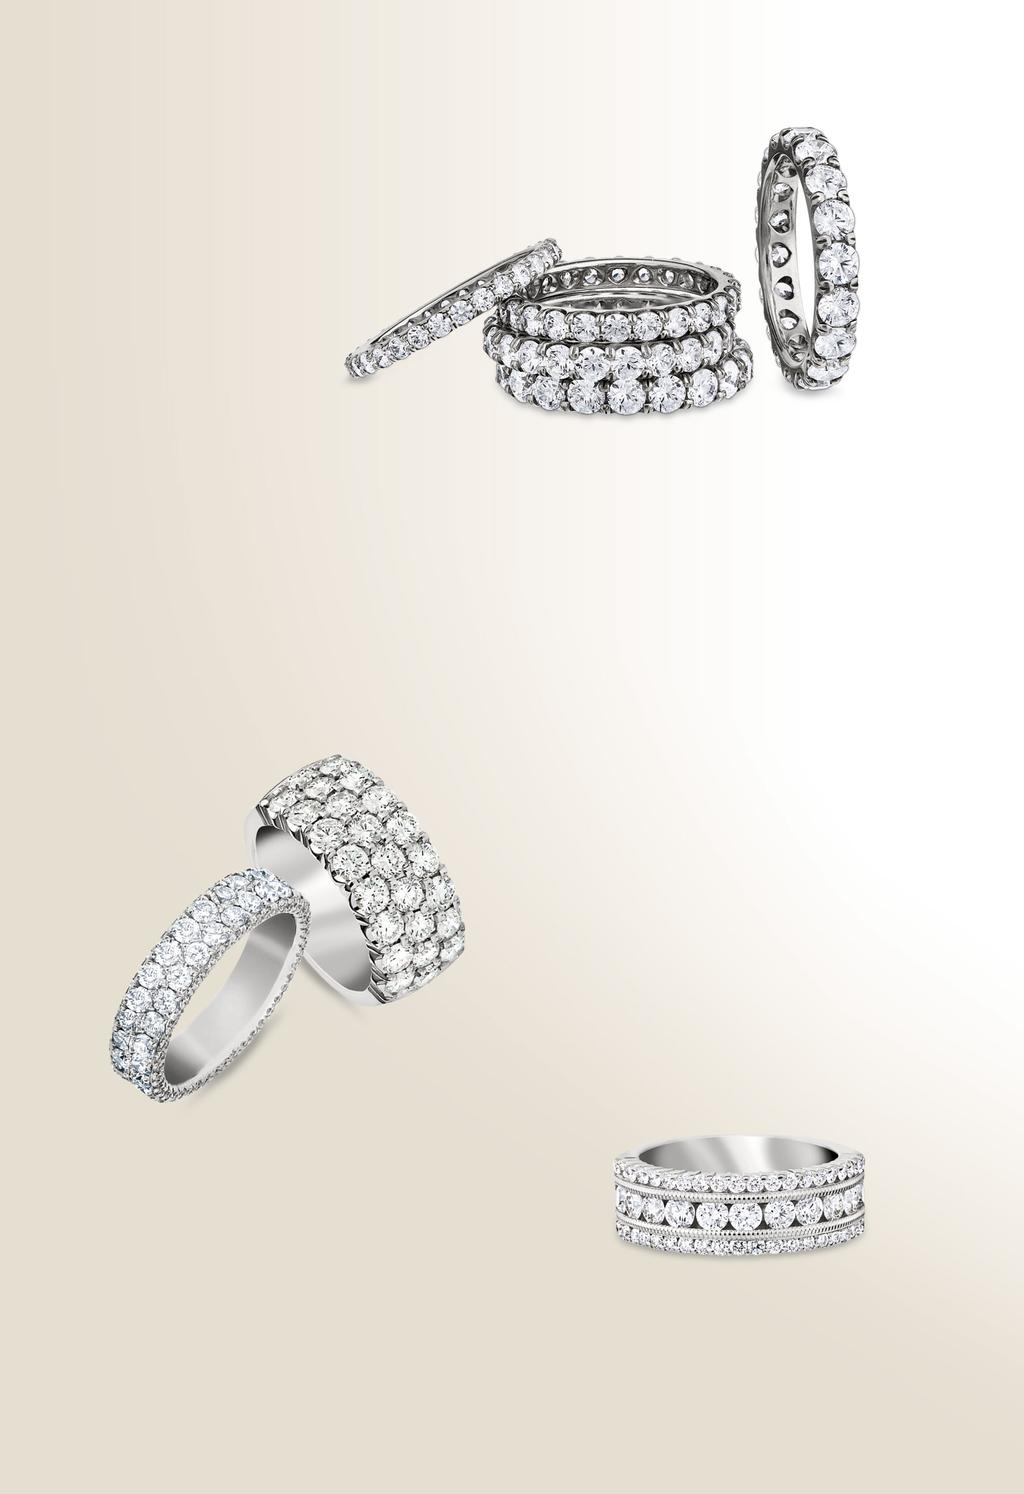 B A E Signature ollection G F H A E. ommon prong diamond eternity rings from $2,975 F. Two row diamond eternity ring, $10,800 G.